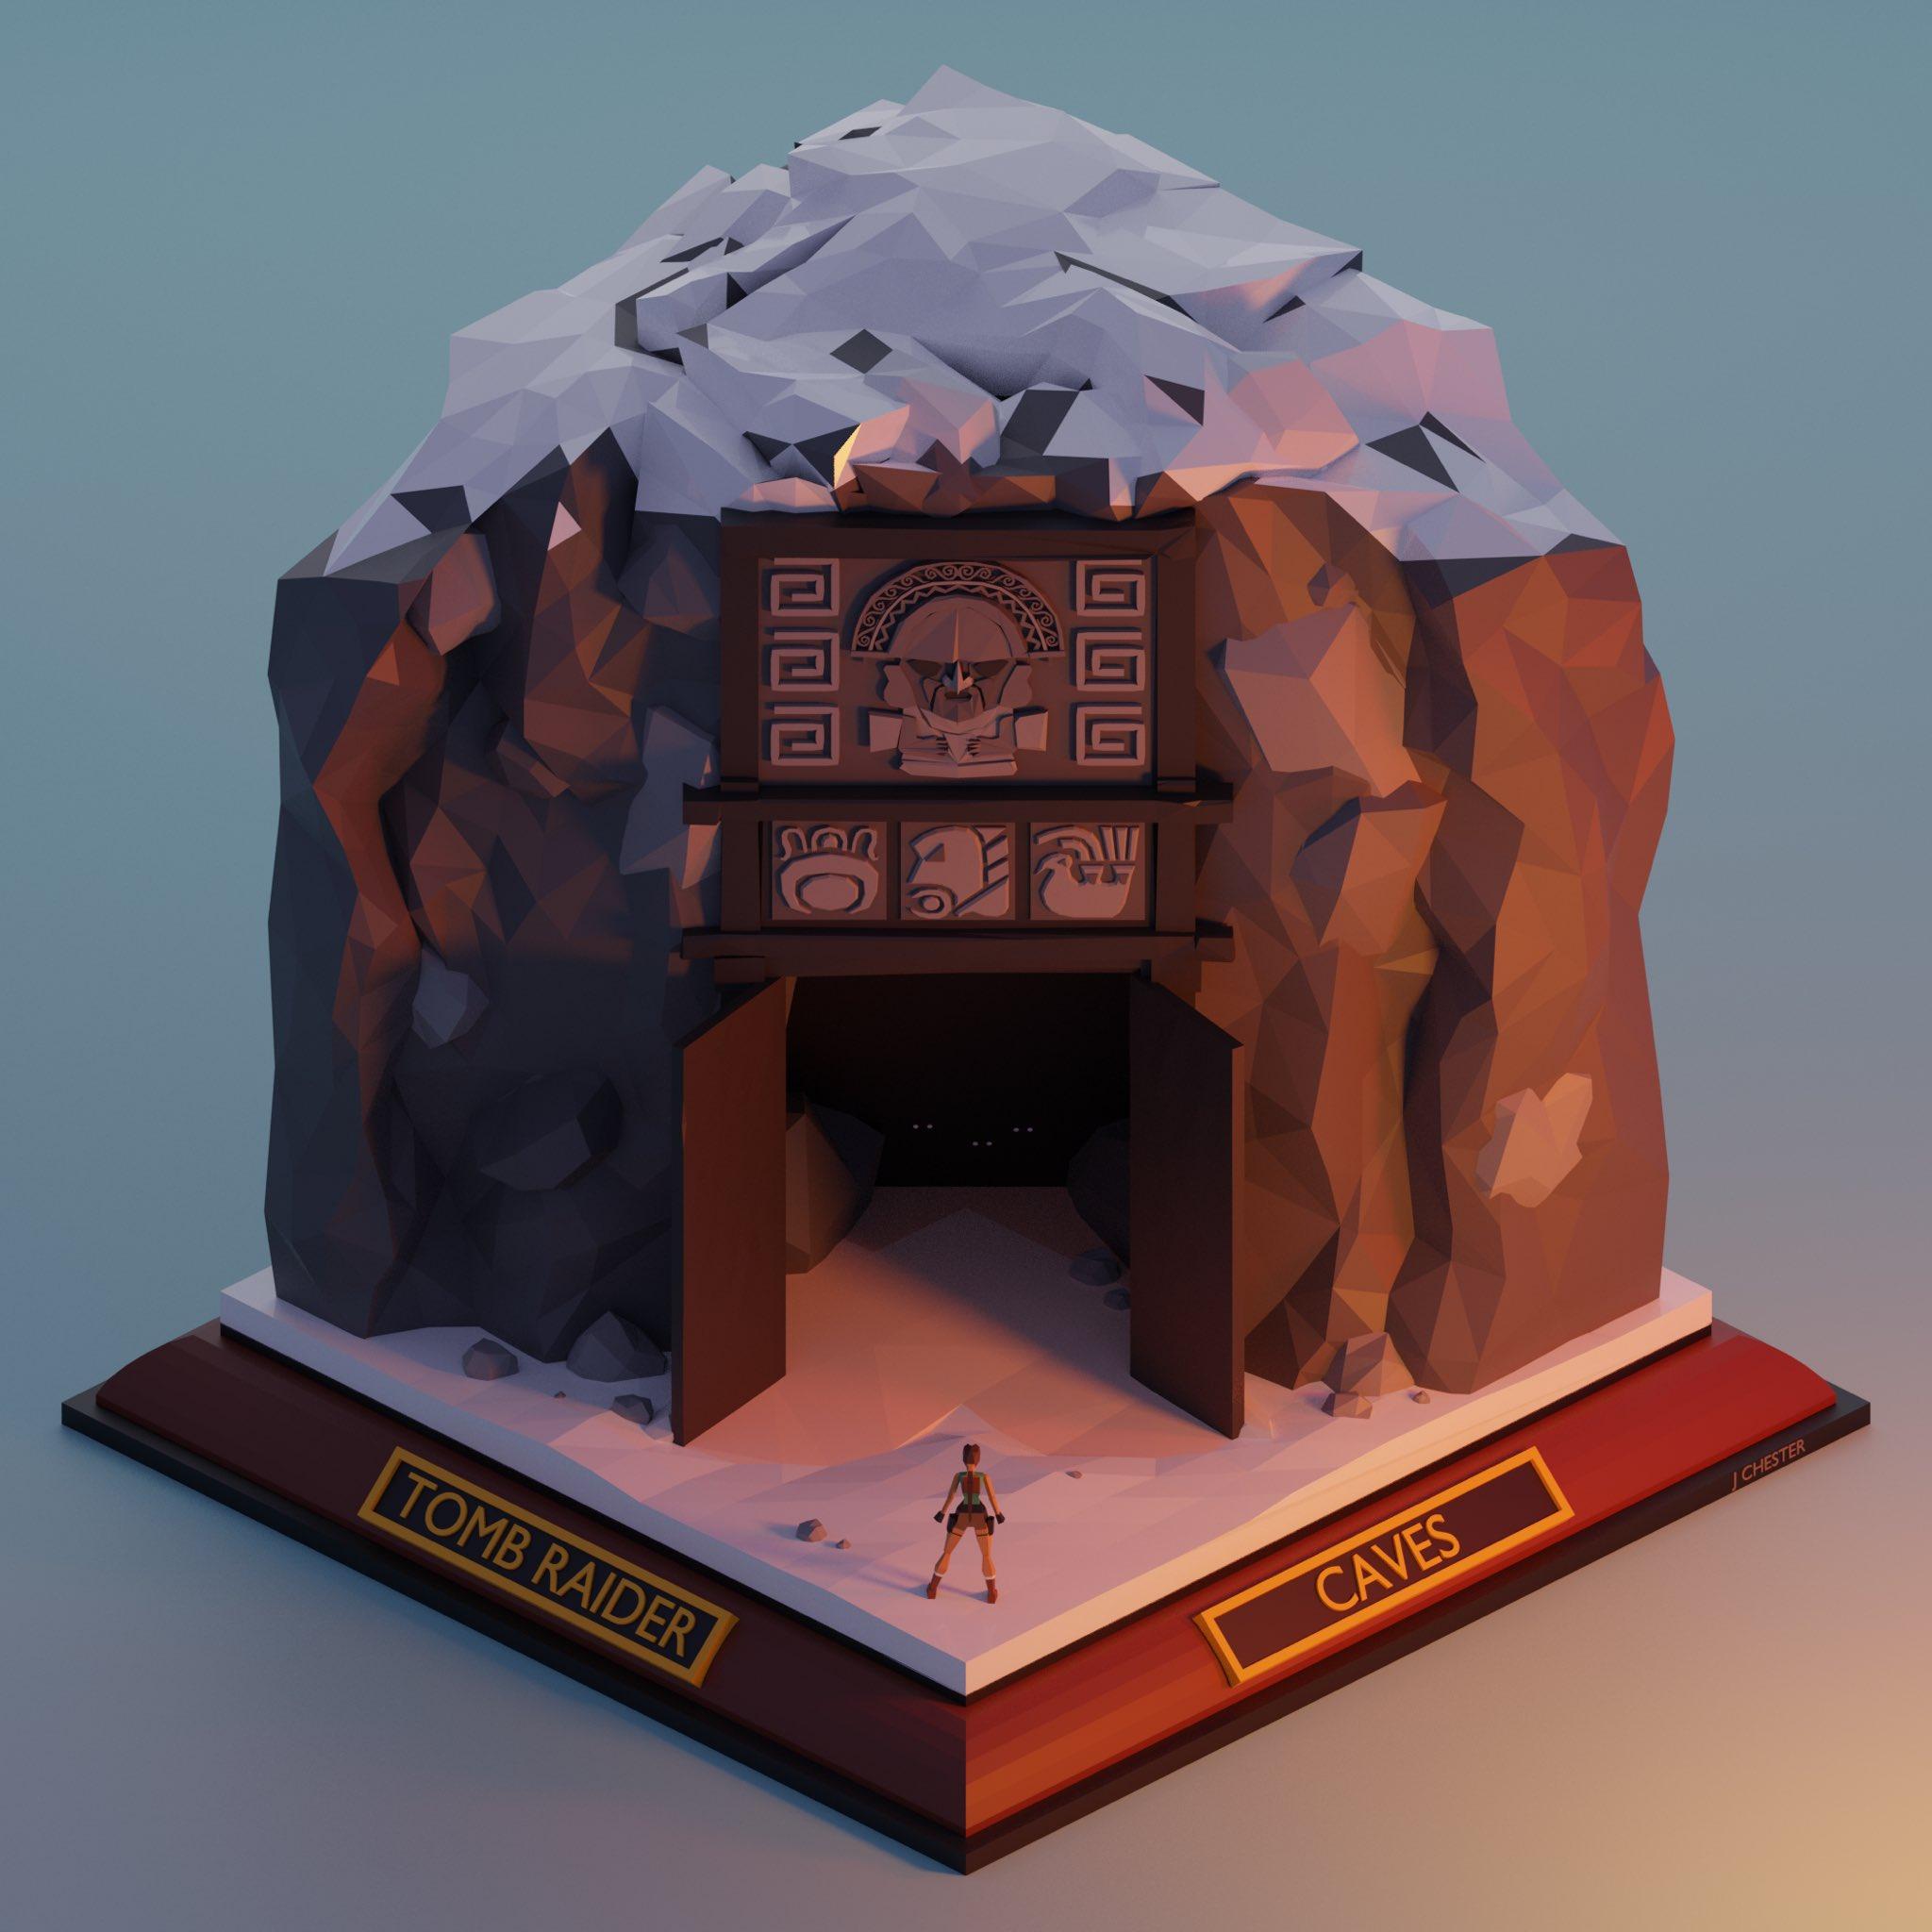 ‘Reimagined Low Poly diorama’ level series by Jason Chester - TR1 - Caves